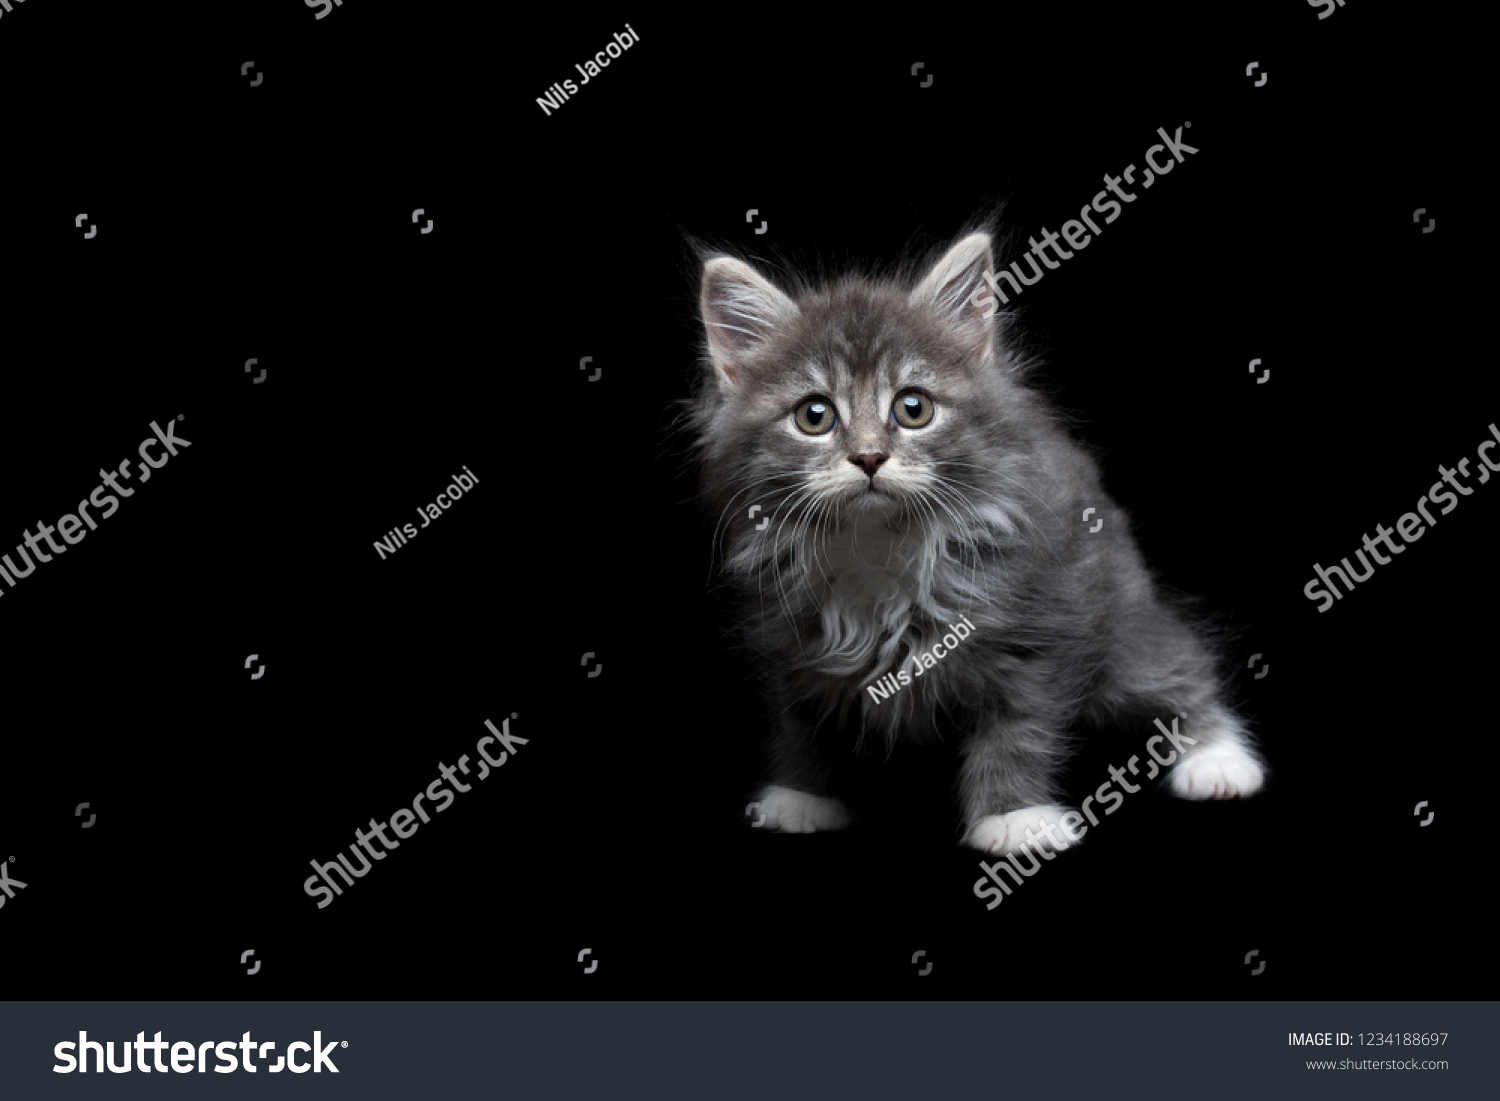 8 week old blue tabby maine coon kitten standing on all fours looking directly at camera in front of black studio background #1234188697